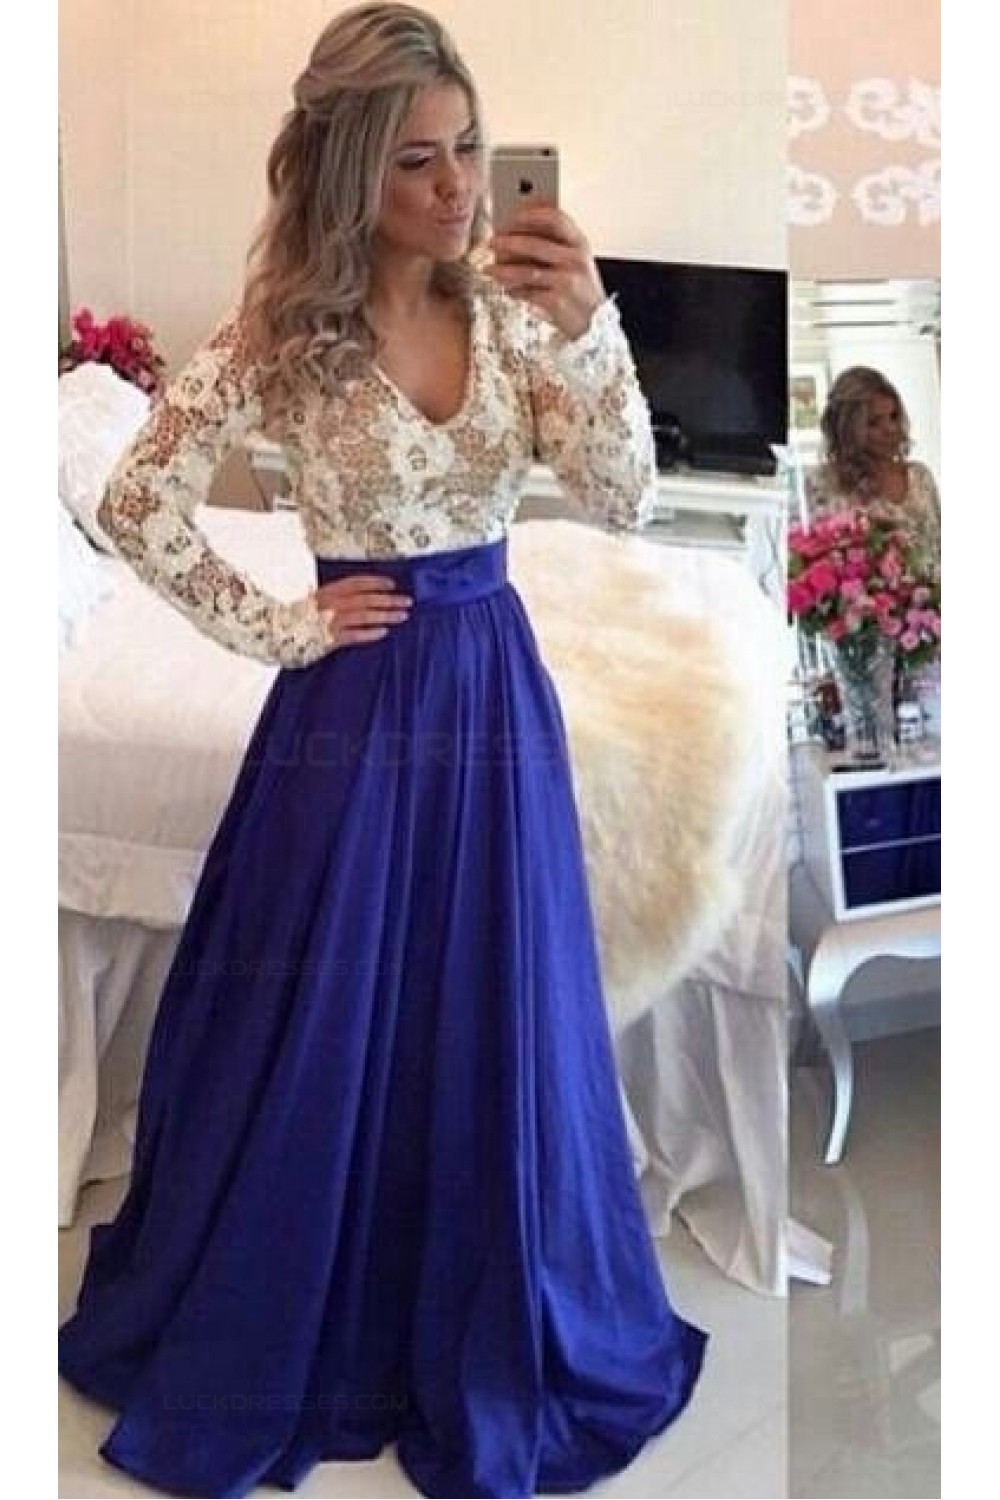 royal blue and white formal dress